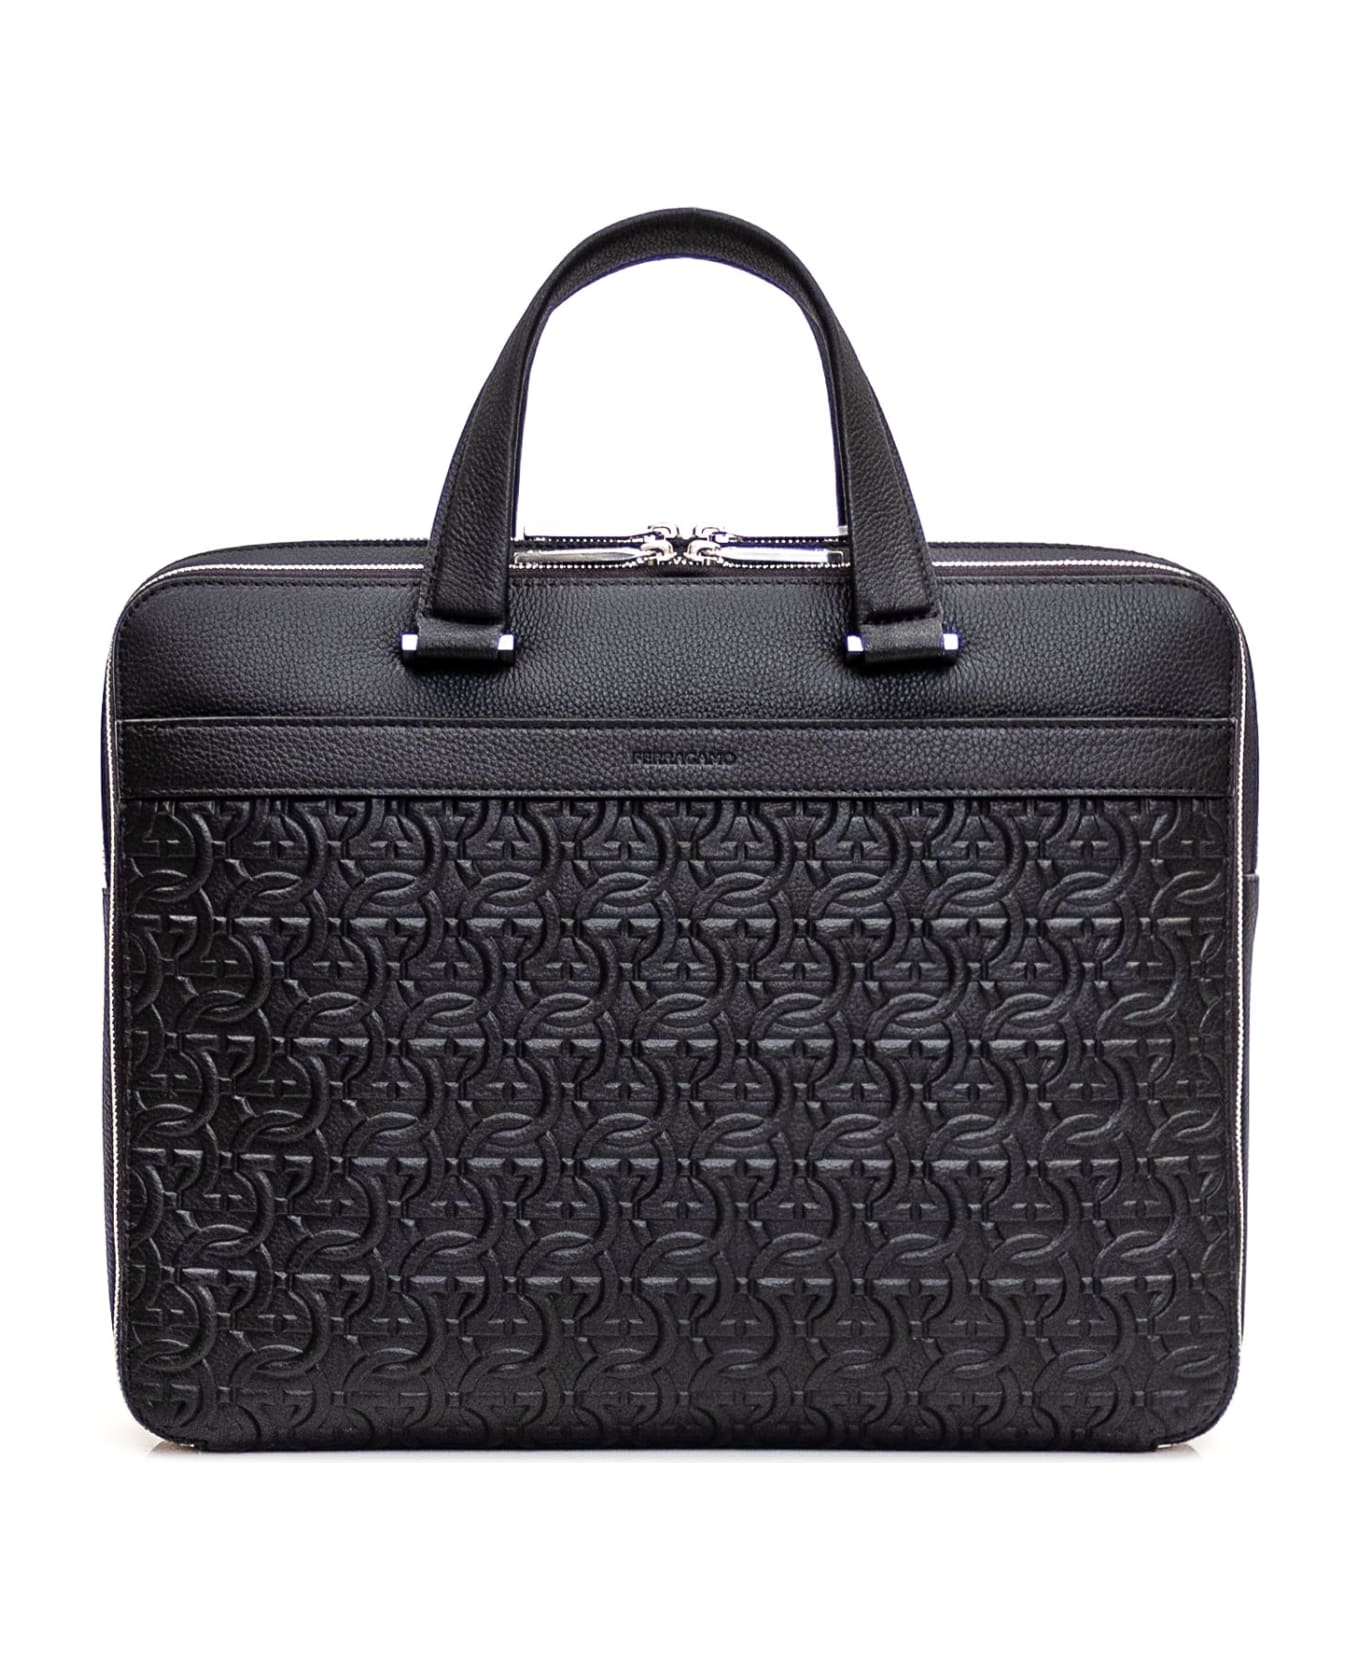 Ferragamo Business Bag With Embossing Material - NERO トラベルバッグ